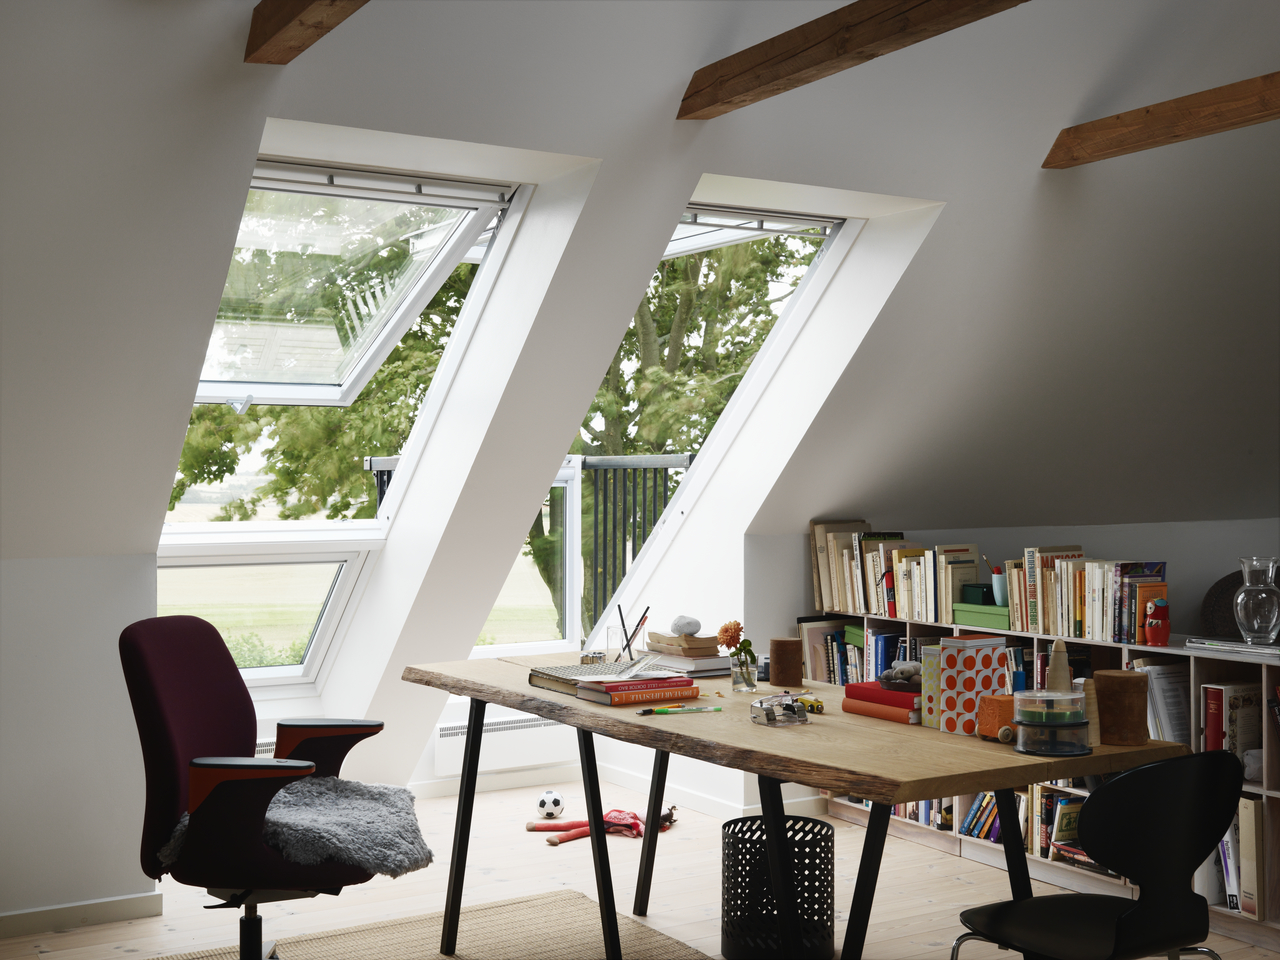 Bring daylight to your home office with VELUX® @VELUXGBI